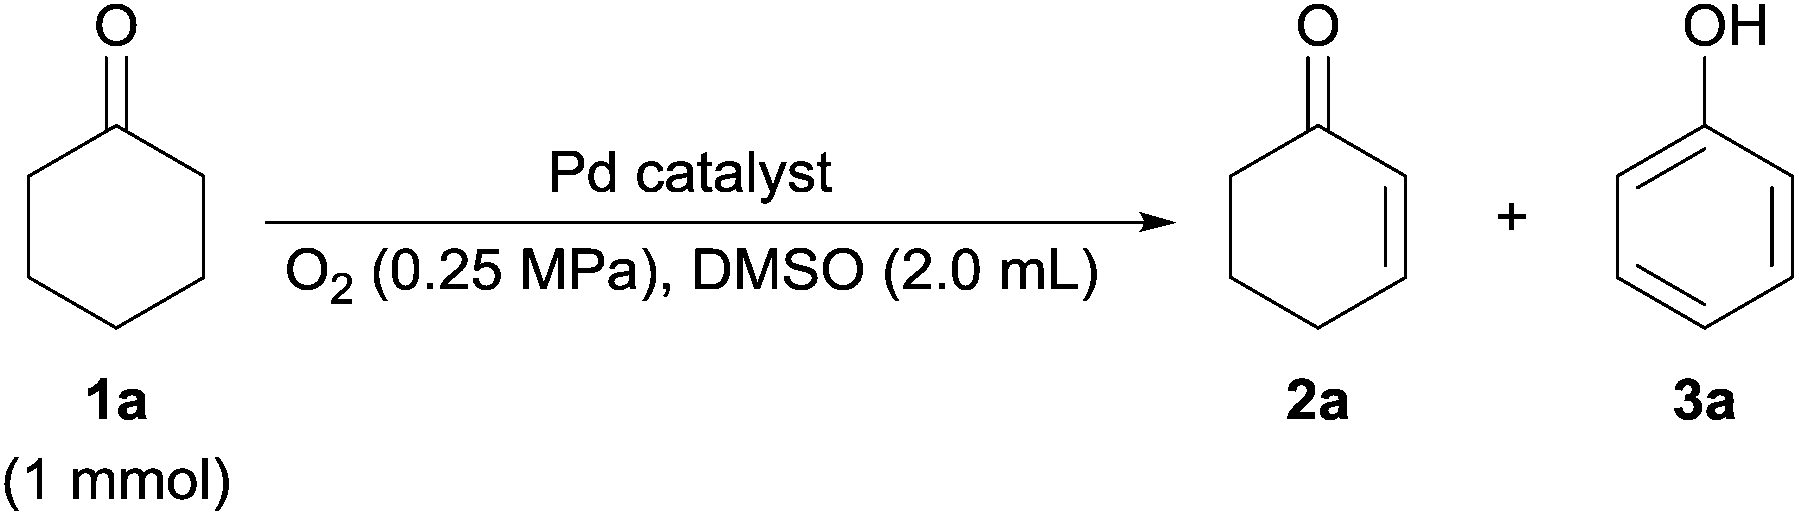 aerobic oxidation of cyclohexanones to phenols and aryl ethers